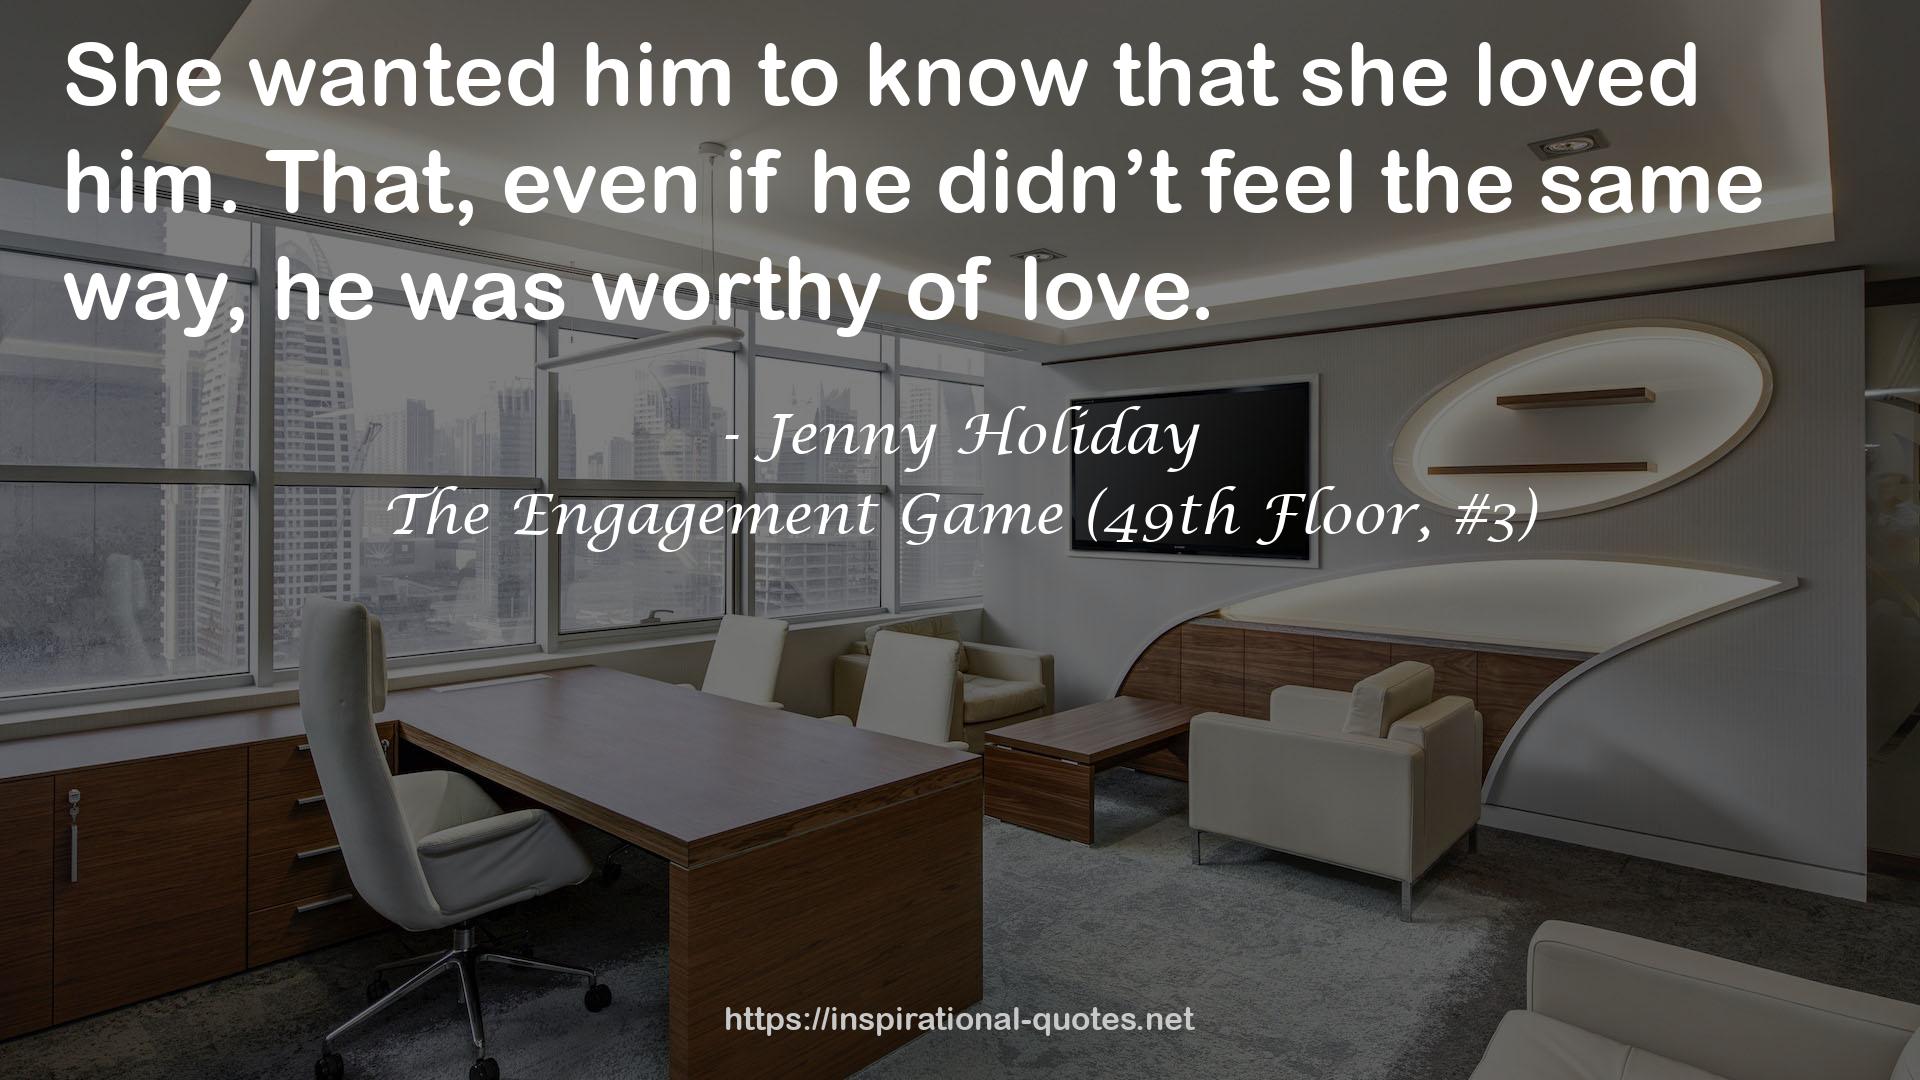 The Engagement Game (49th Floor, #3) QUOTES